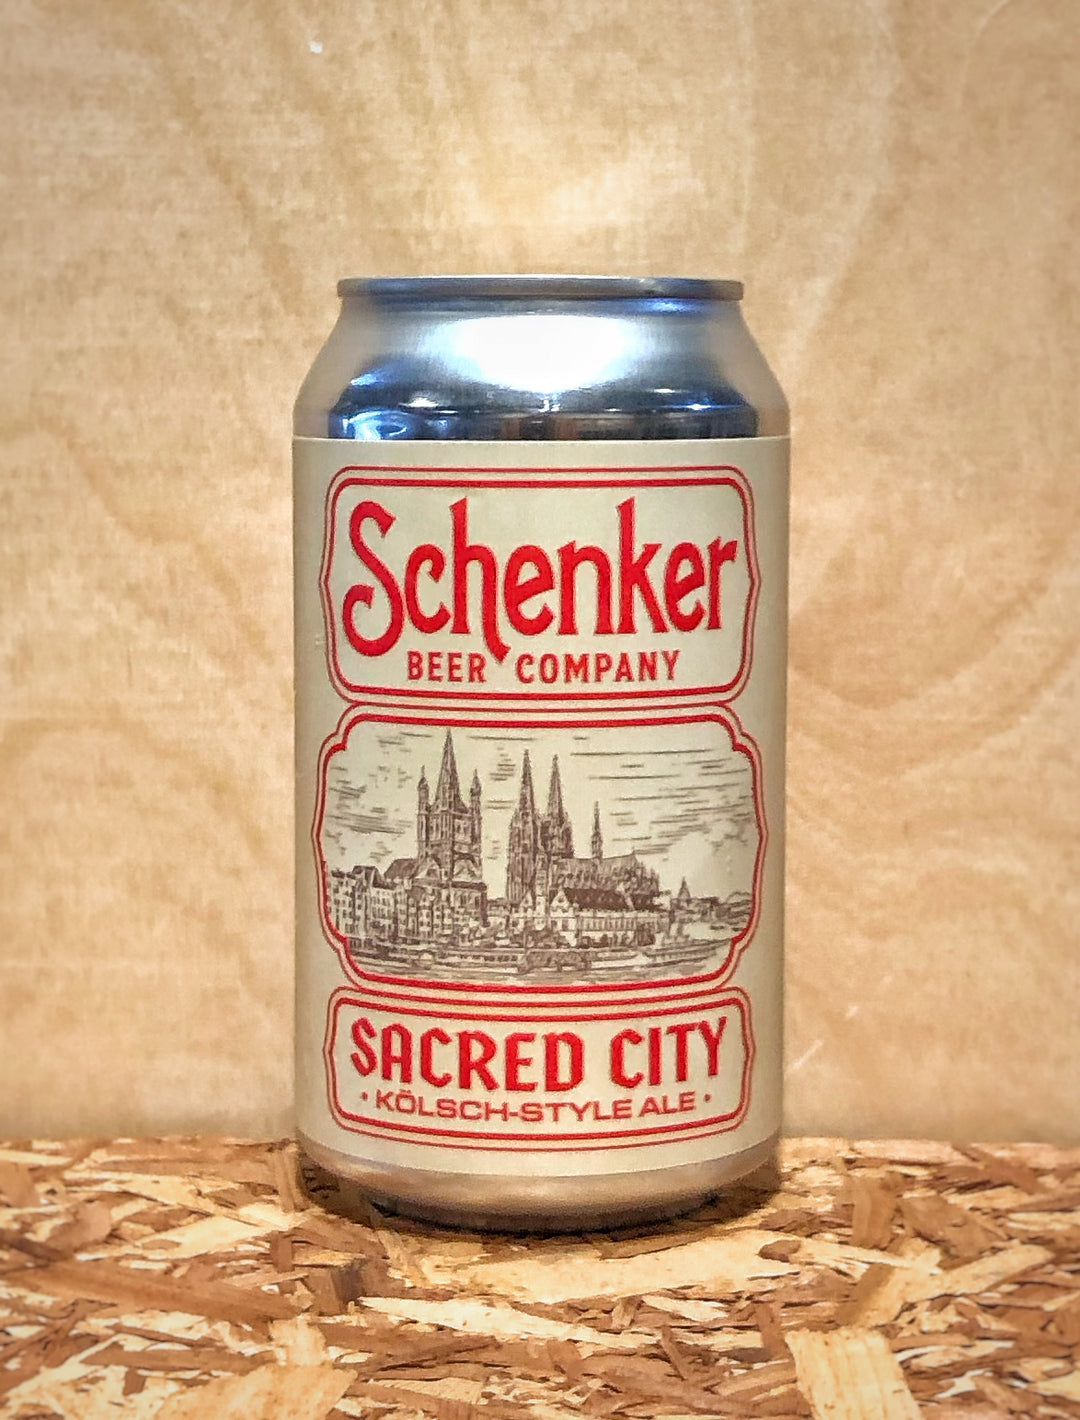 Schenker Beer Company 'Sacred City' Kolsch-Style Ale (North Haven, CT)